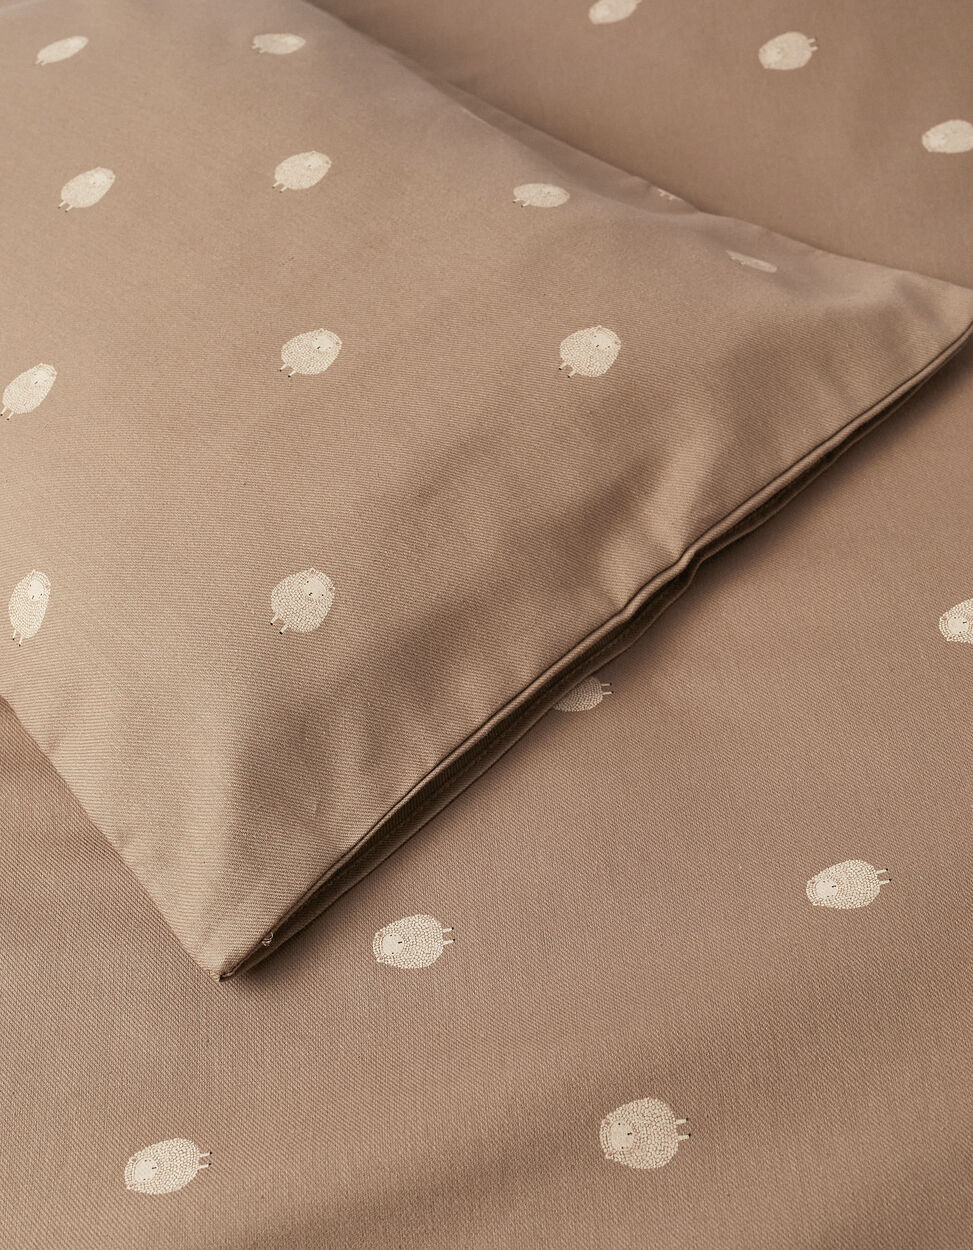 Duvet Cover, Filling and Pillowcase Gloop! for Bed 60X120Cm, Sheep